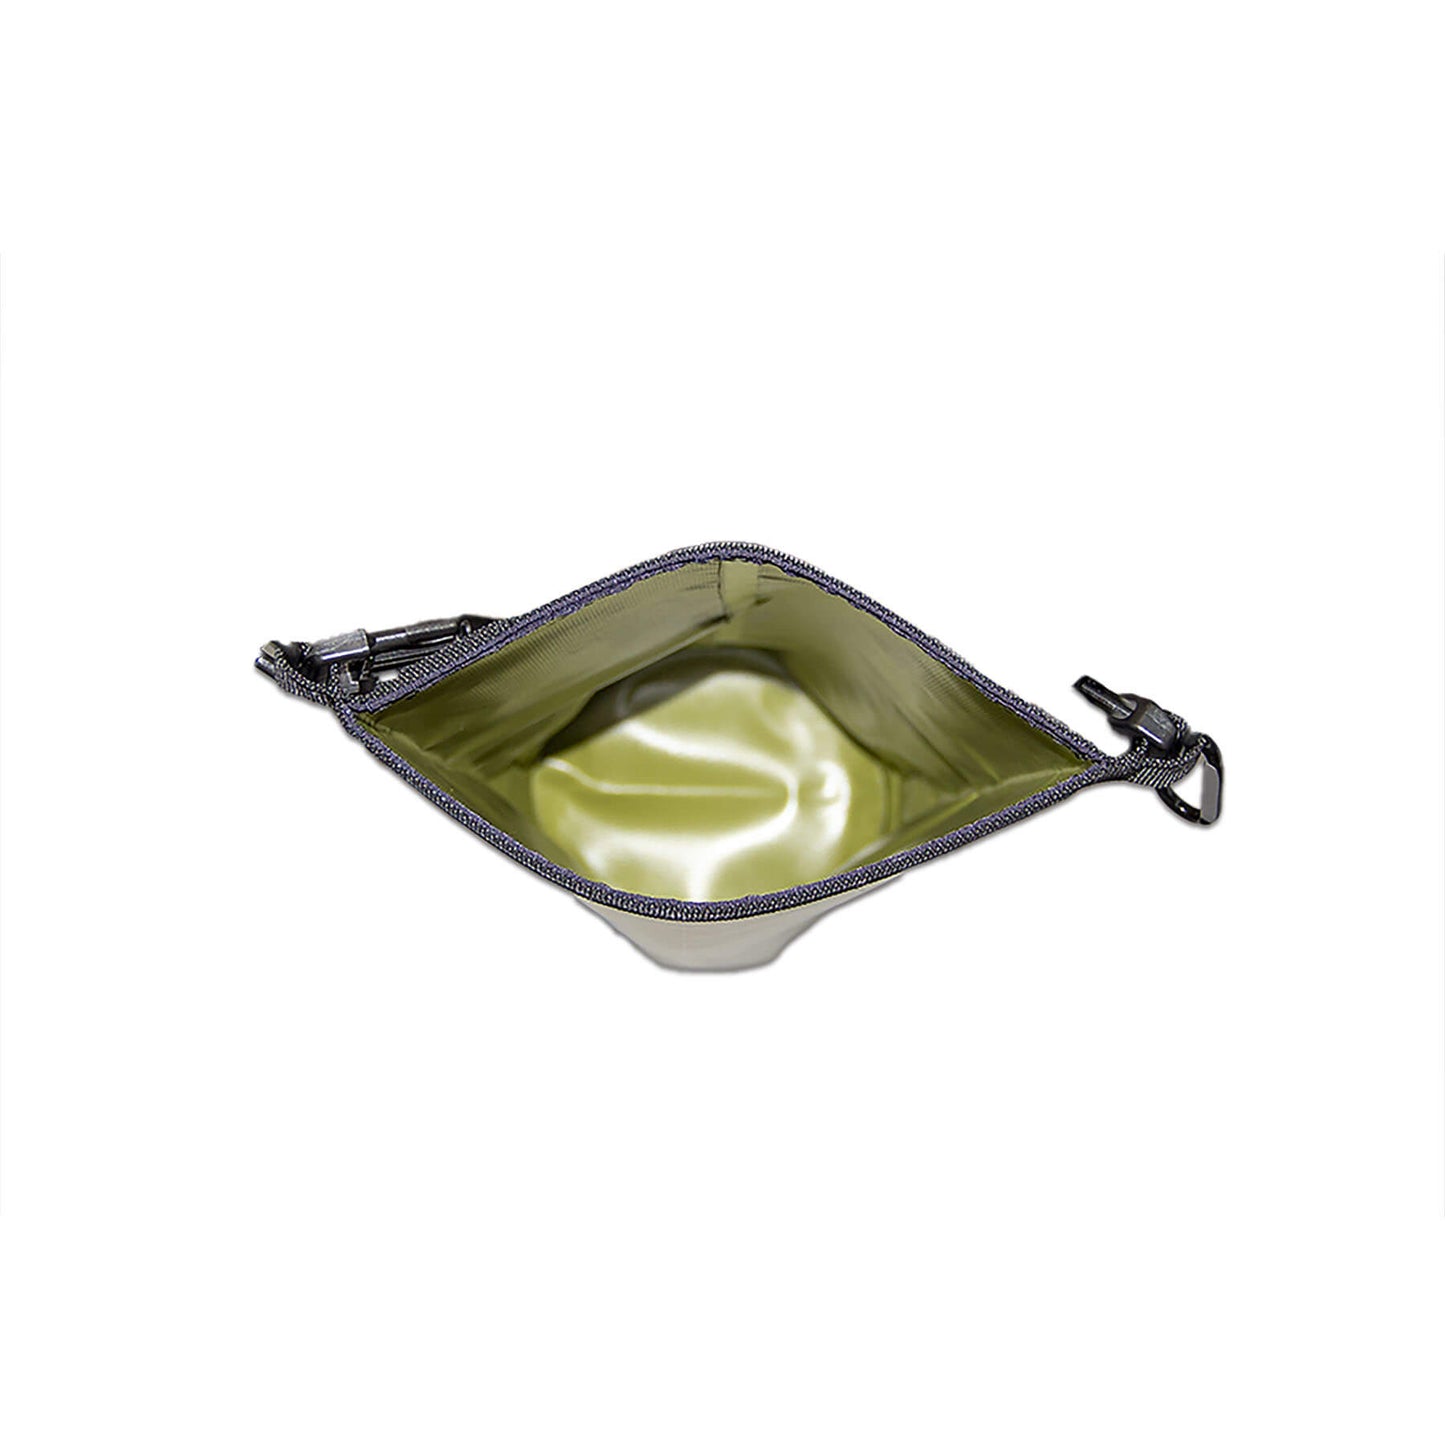 waterproof dry bag 5 litres a handy grab size with detachable straps and carabiner  in olive the inside view